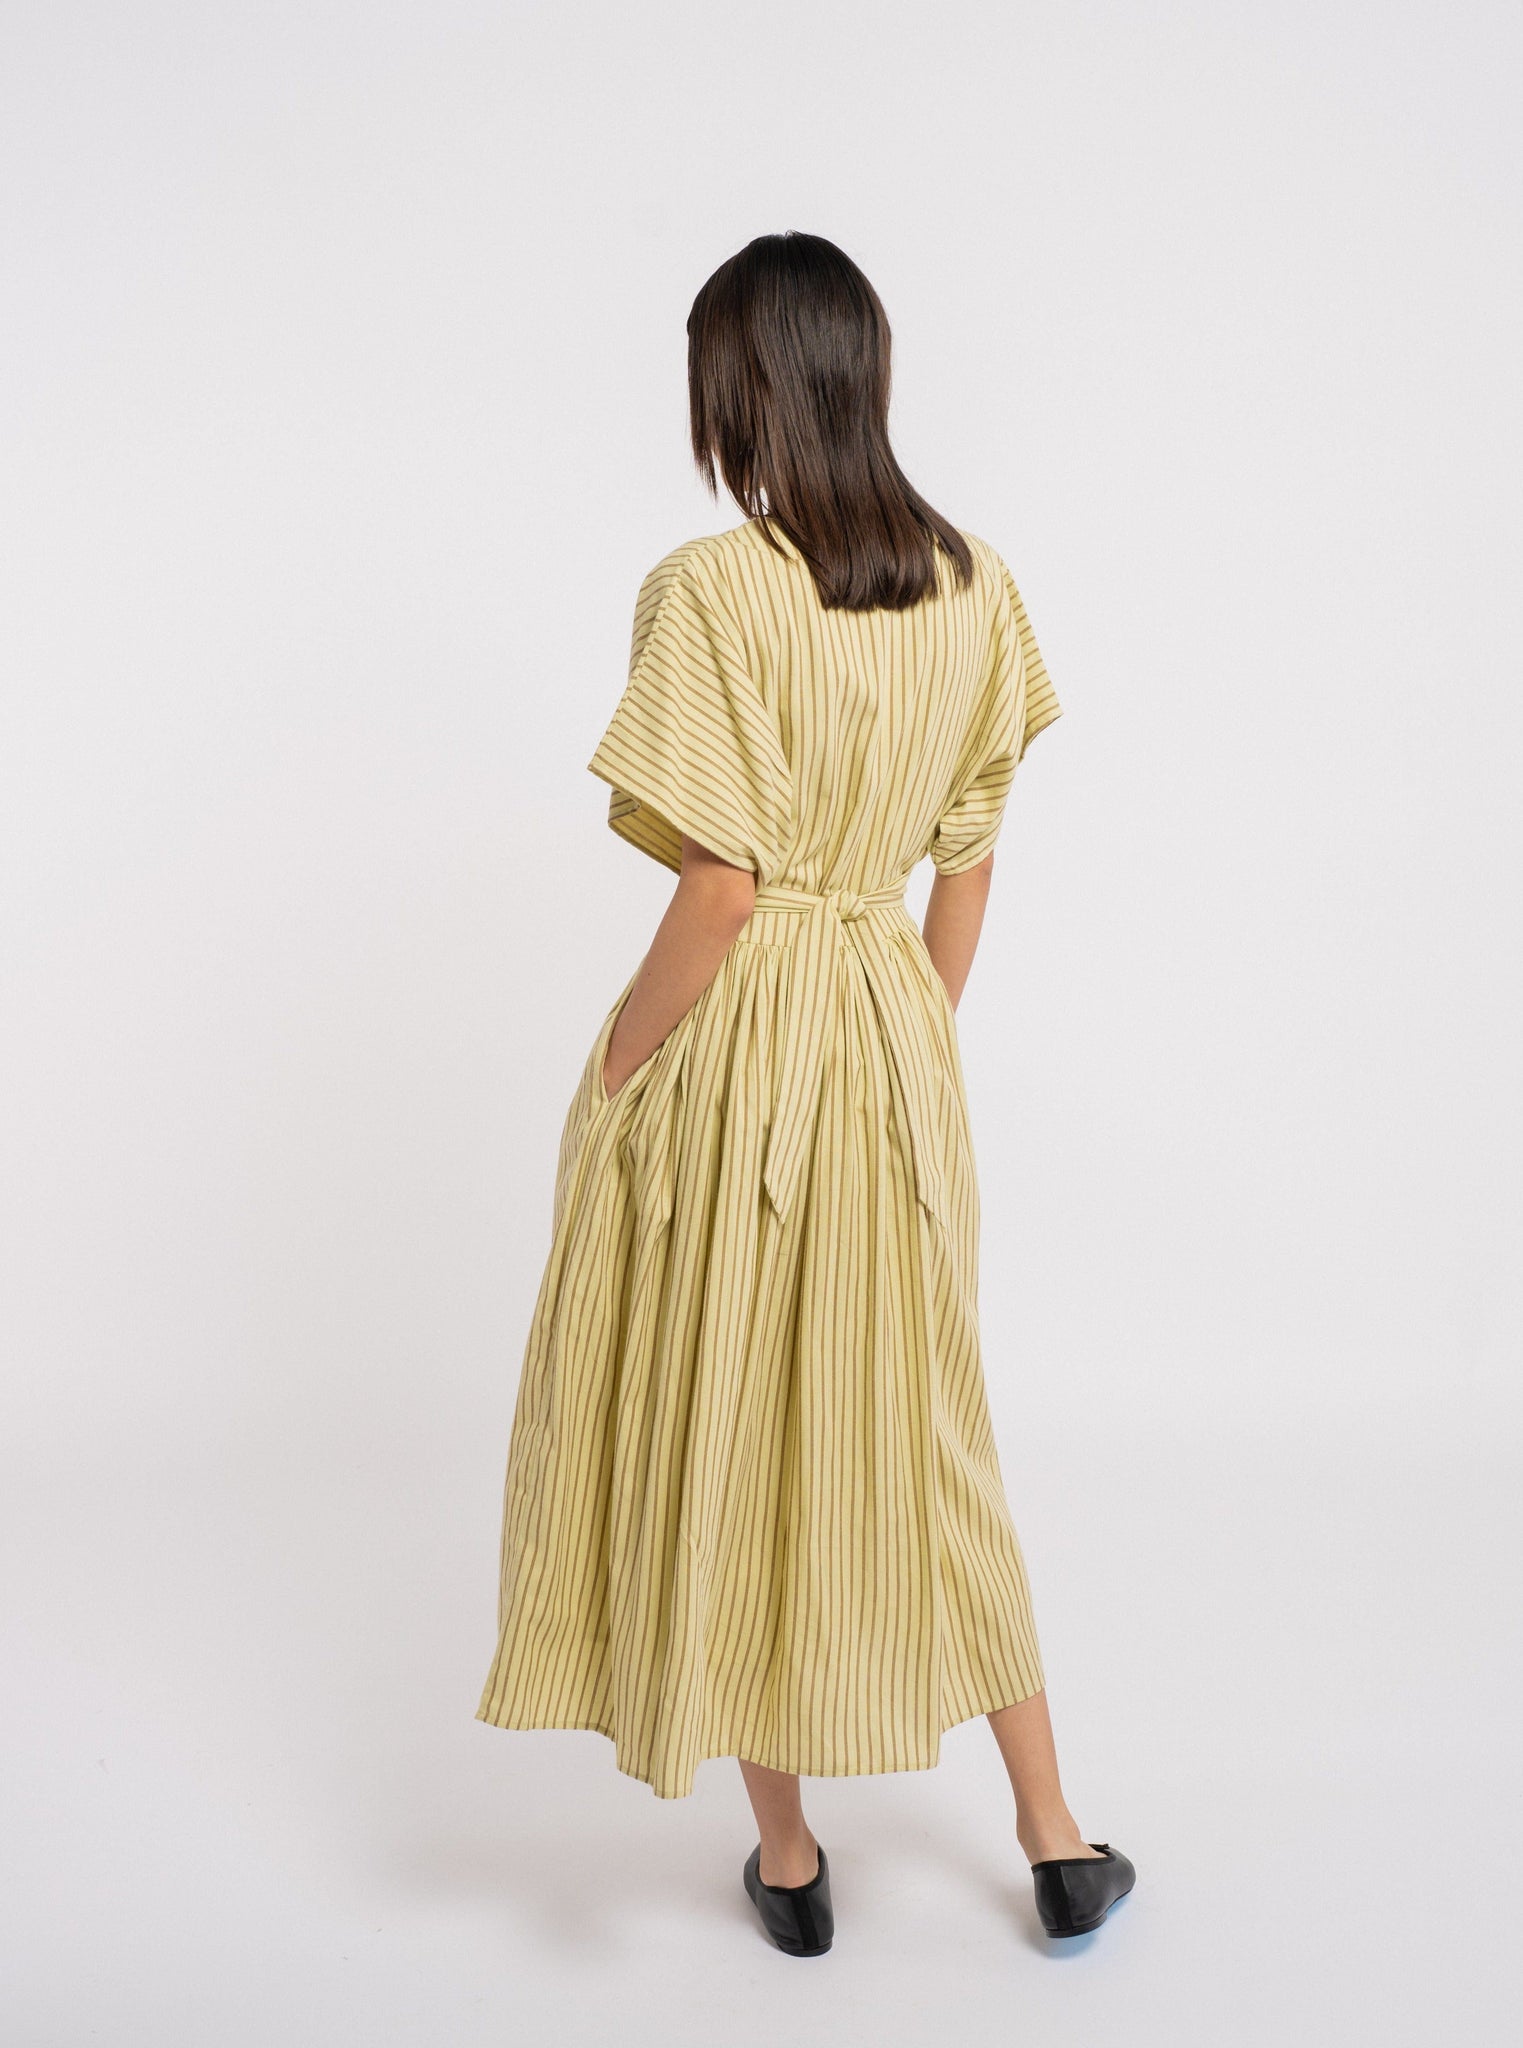 The back view of a woman wearing the Anita Dress - Feather Grass Stripe.